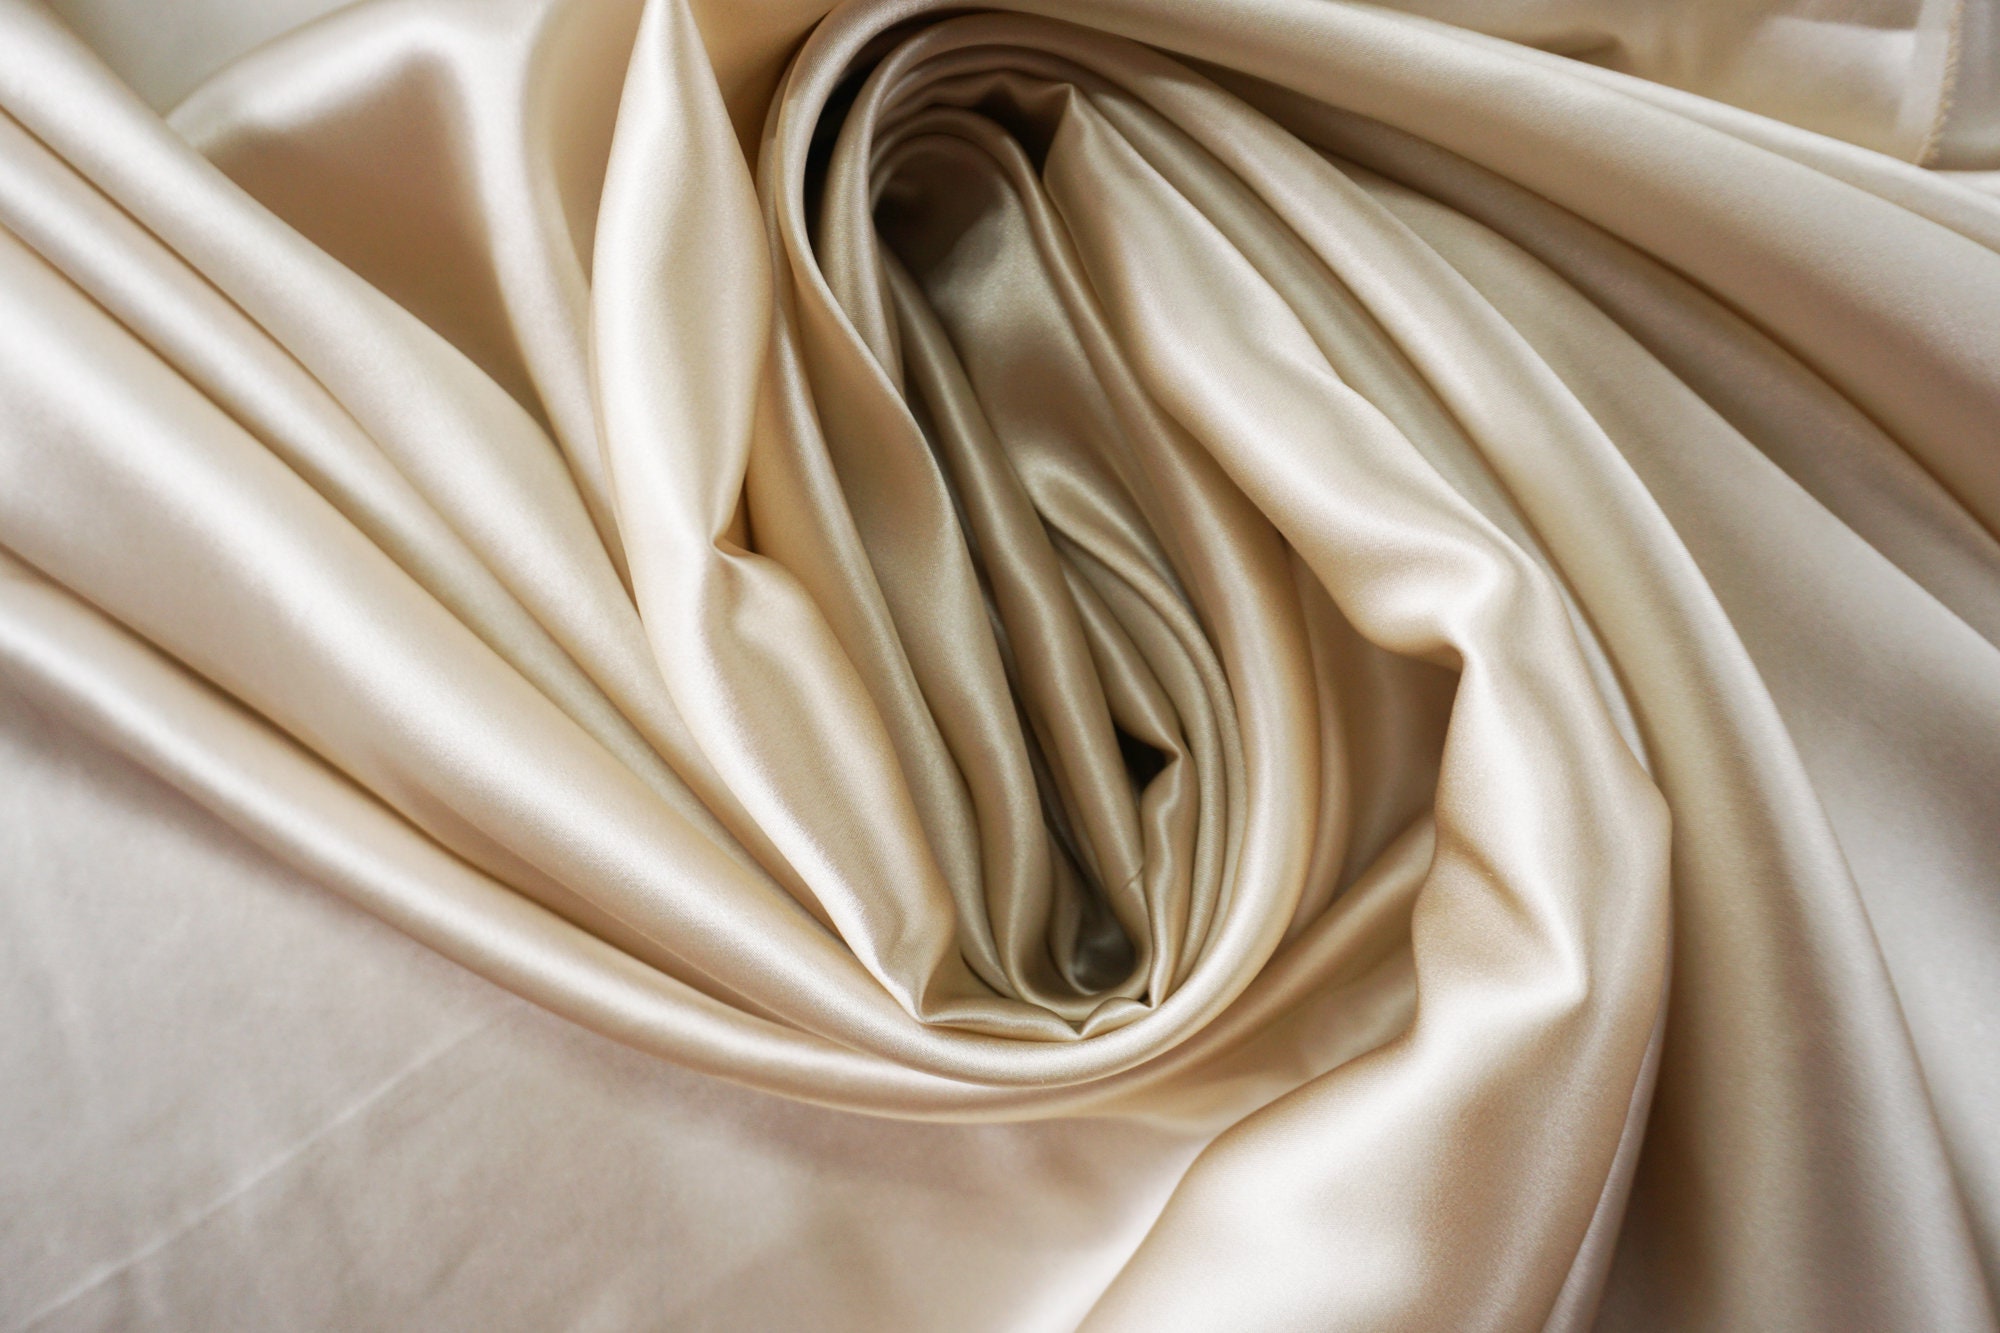 Sandwashed Silk Charmeuse (18.5mm) - Dyed White – Maker's Fabric